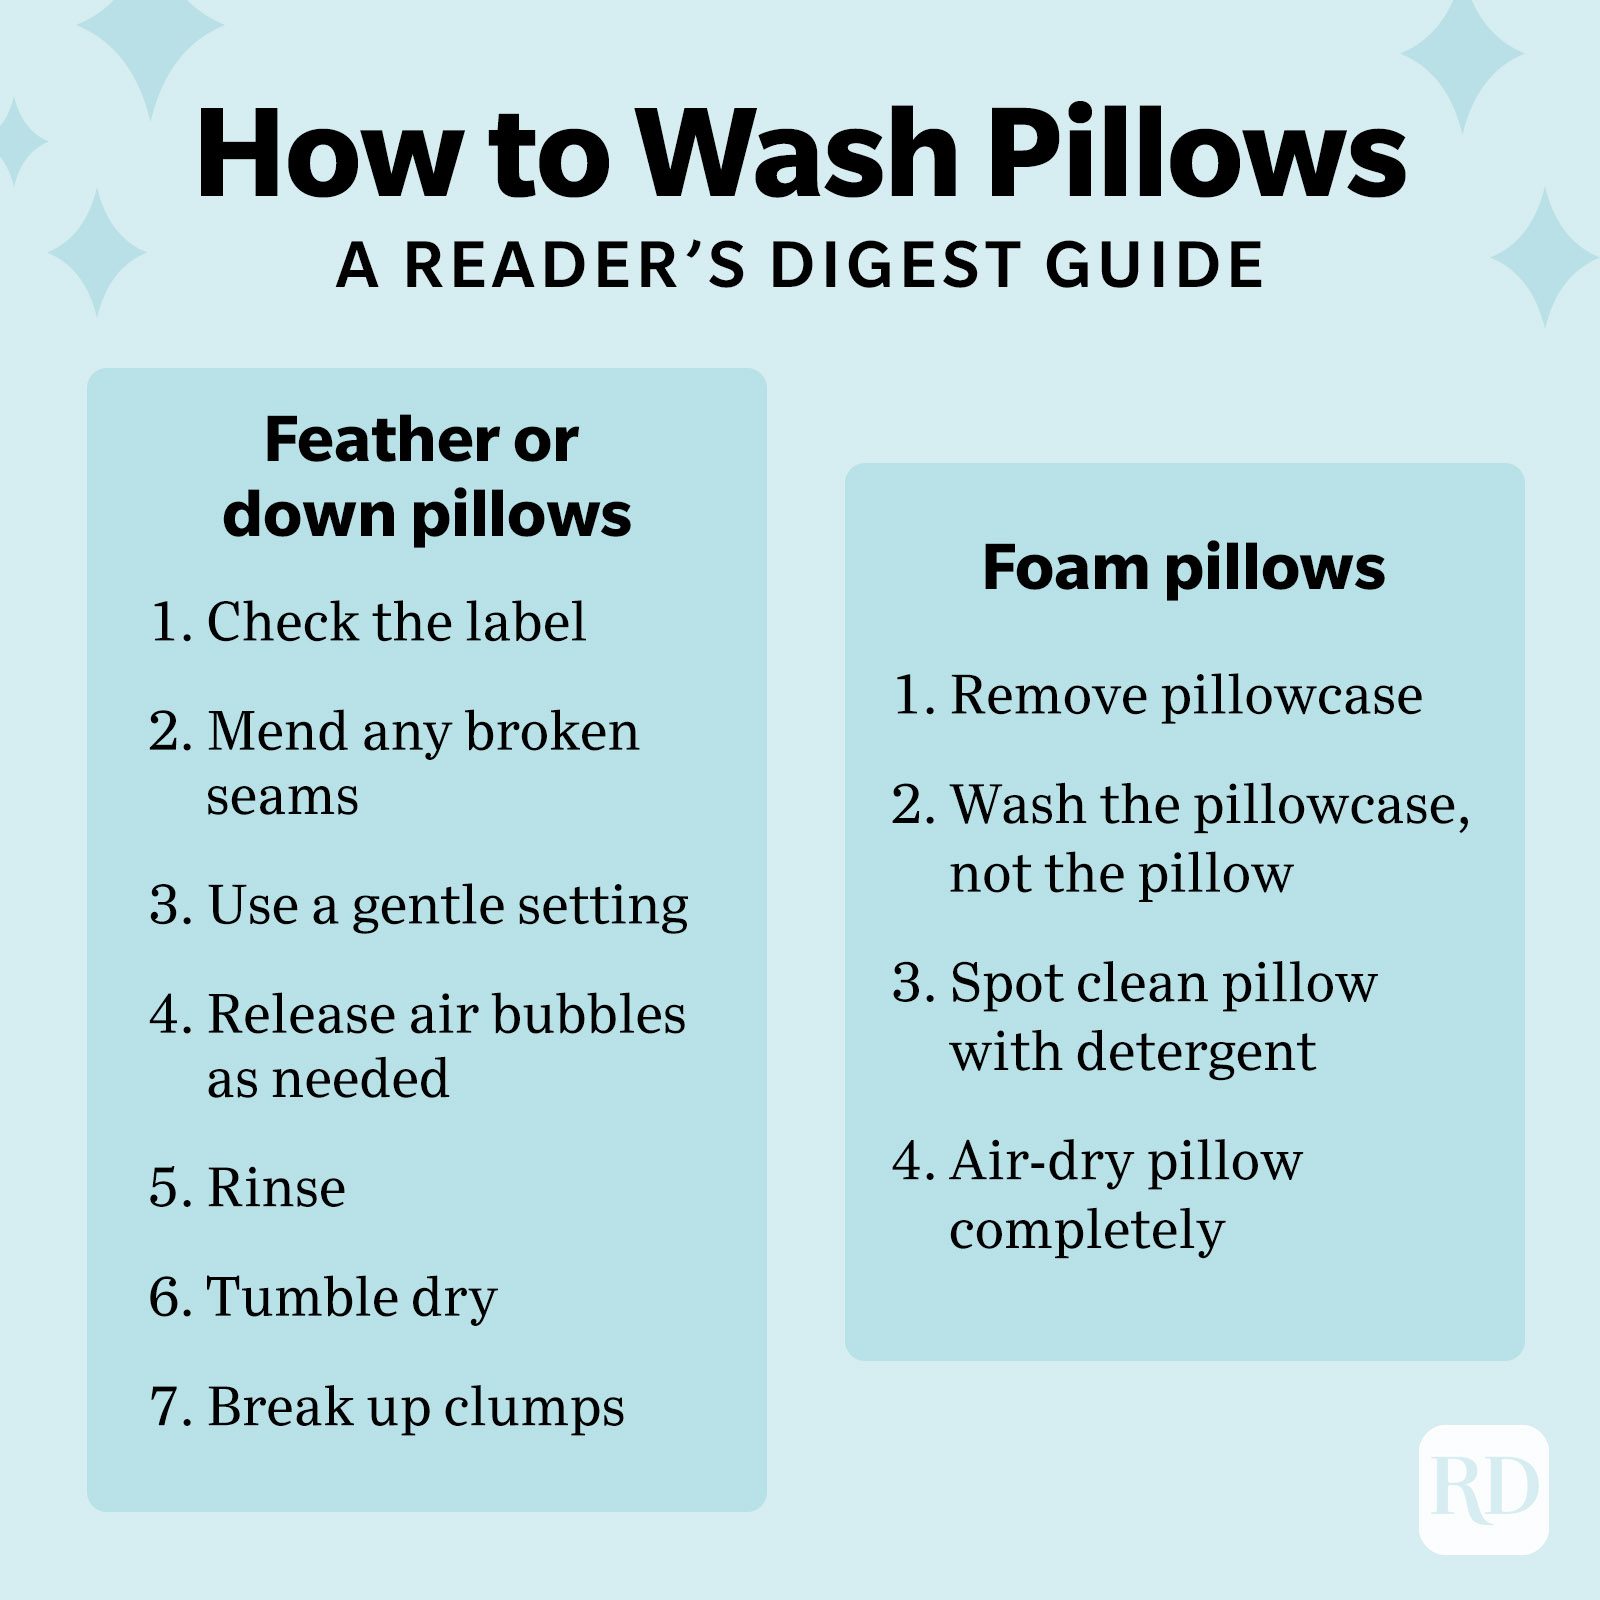 https://www.rd.com/wp-content/uploads/2021/09/how-to-wash-pillows.jpg?fit=680%2C680